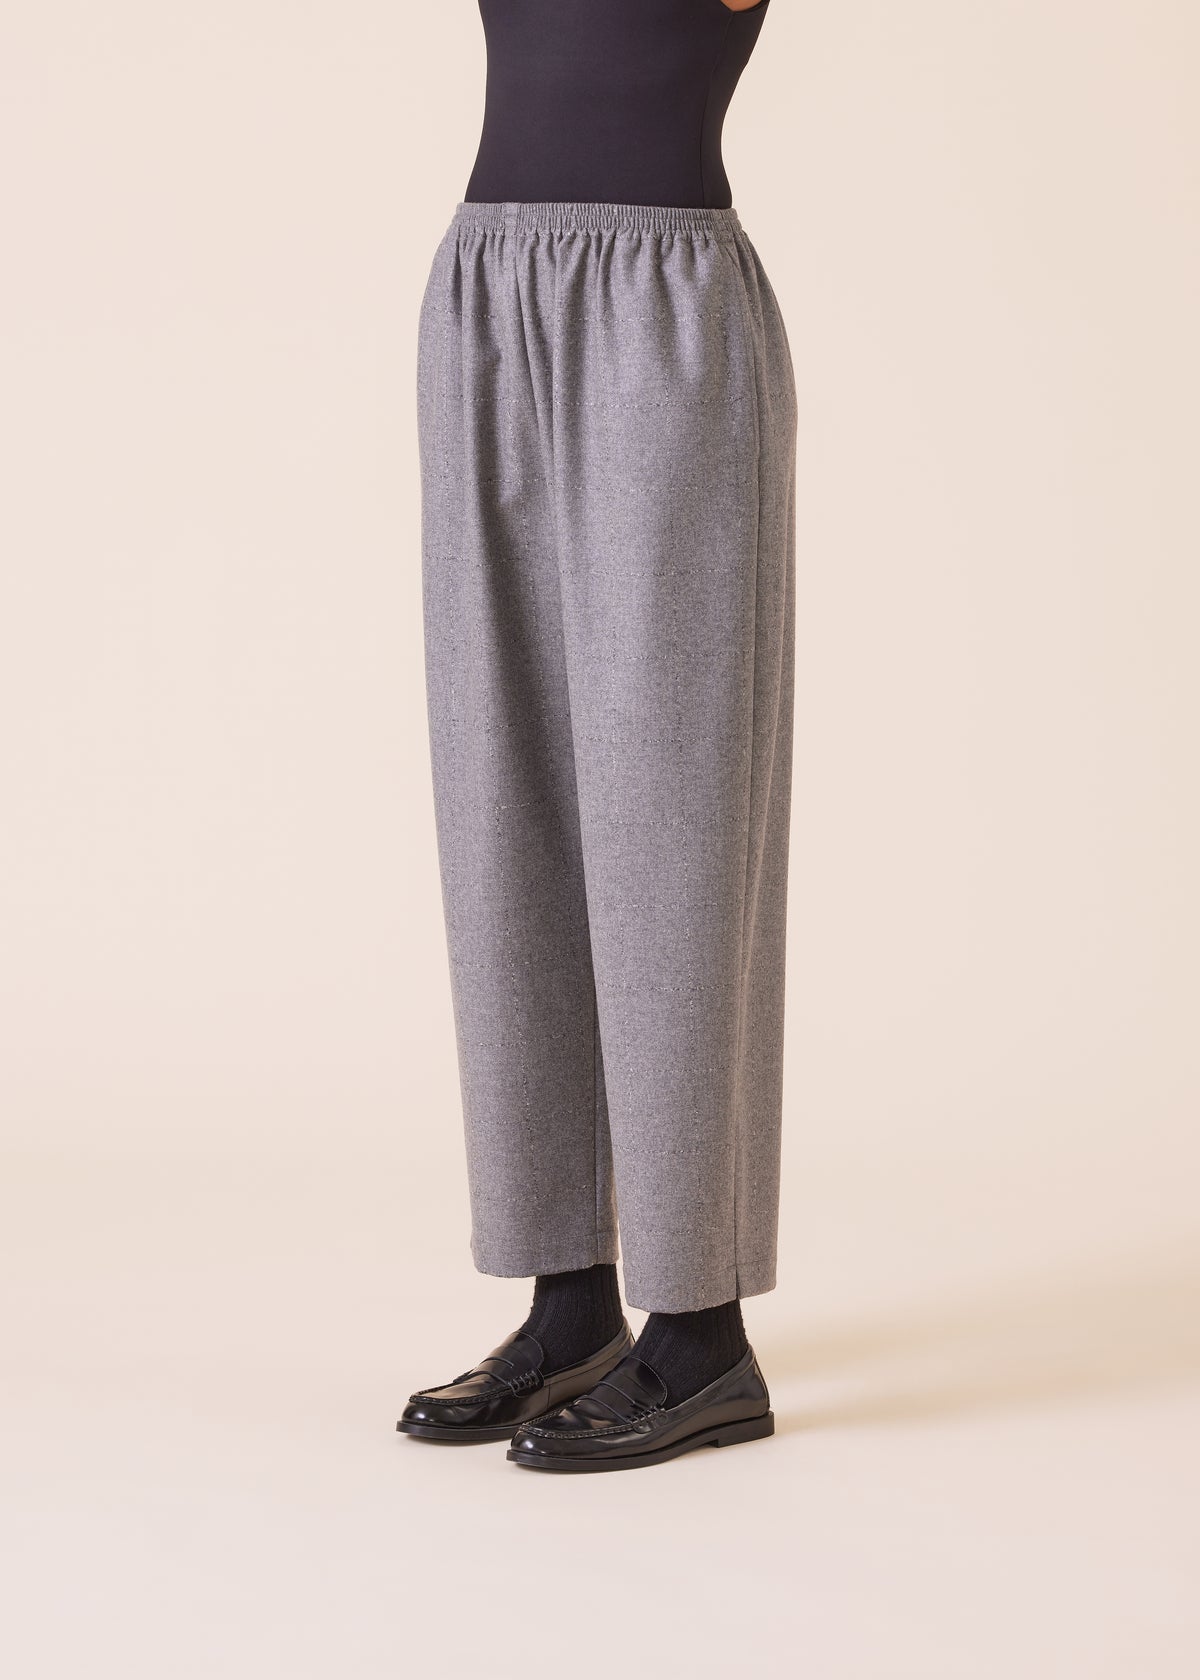 wool cashmere mix longer japanese trouser with ankle slits